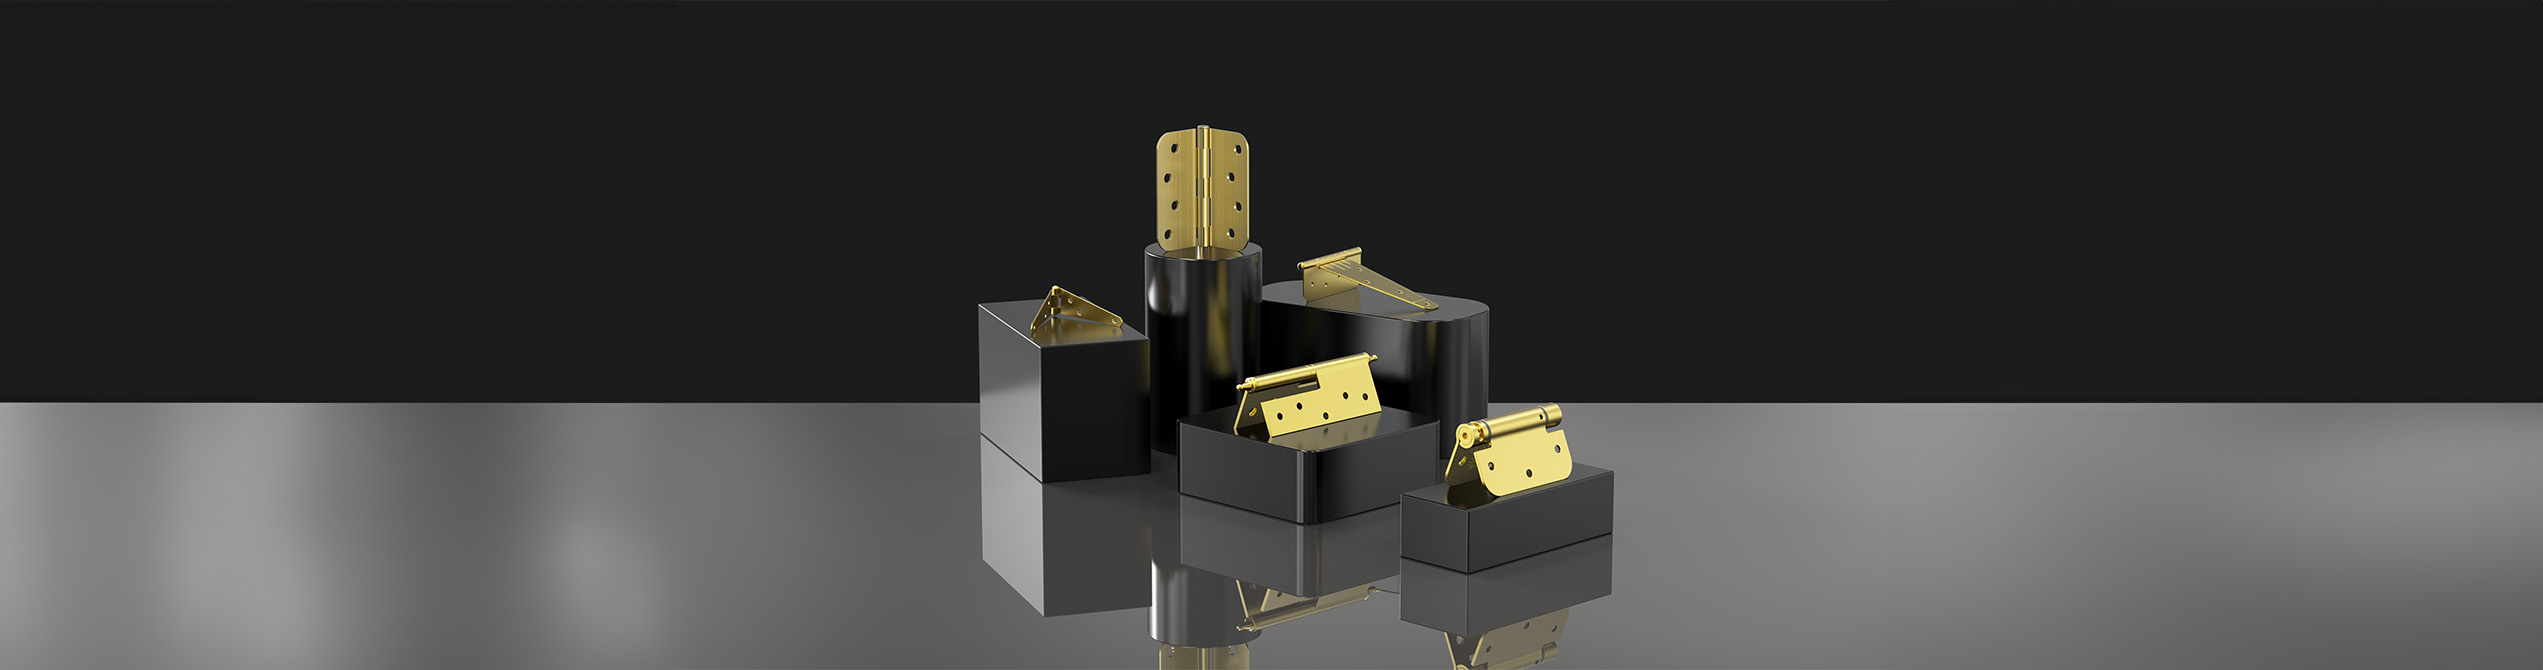 Contact Tendency (TDC): Specialists in Gold Hinges